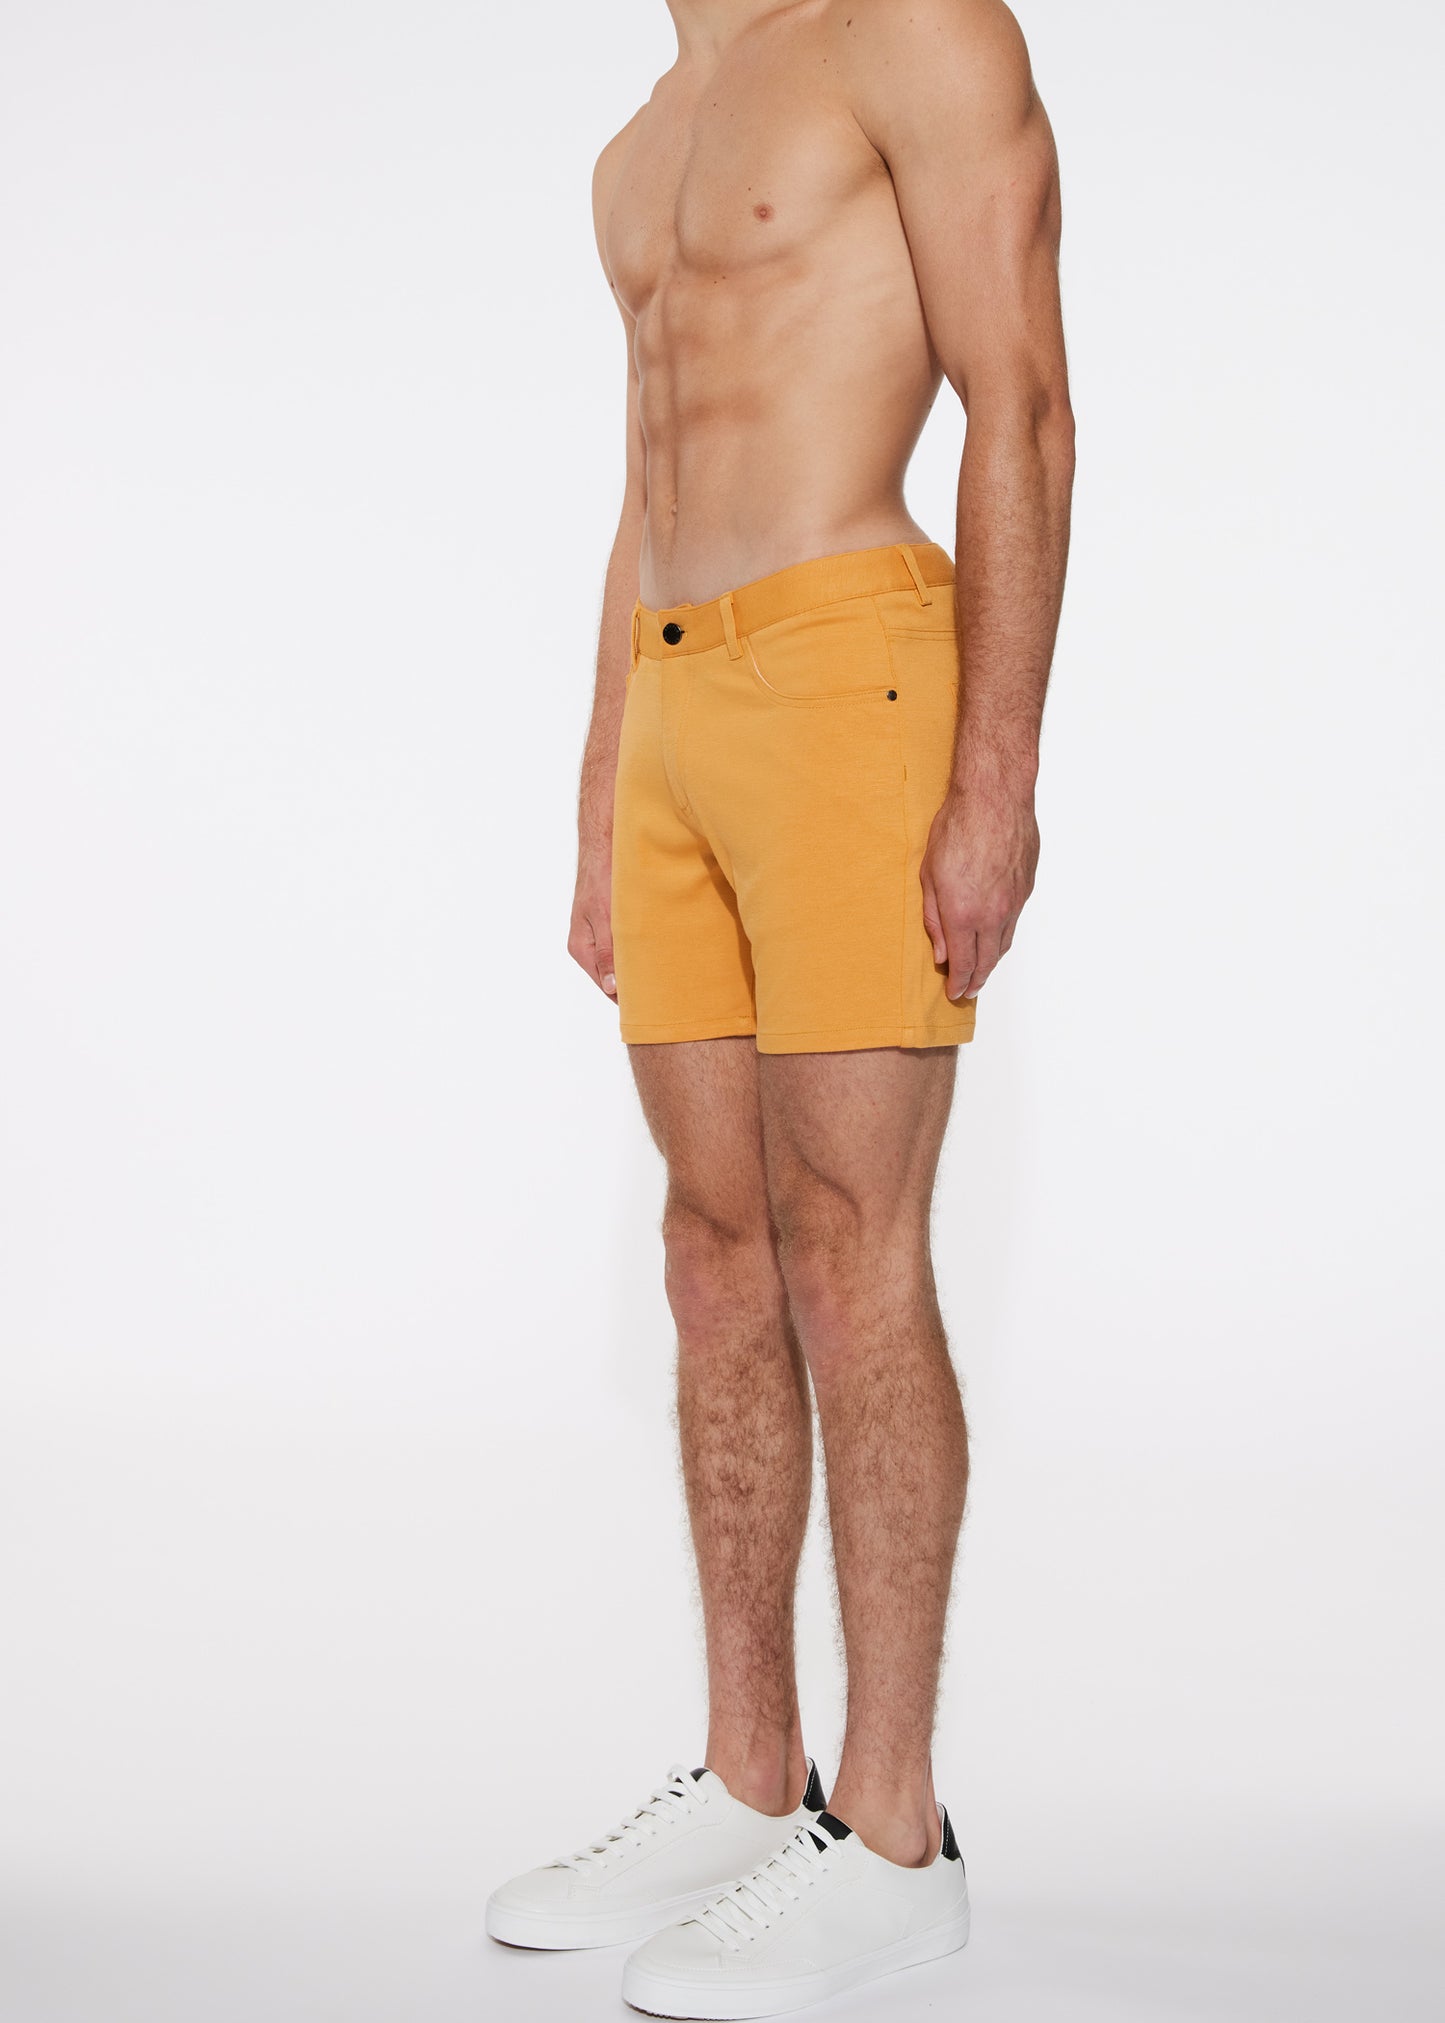 St33le Knit Solid Shorts '23